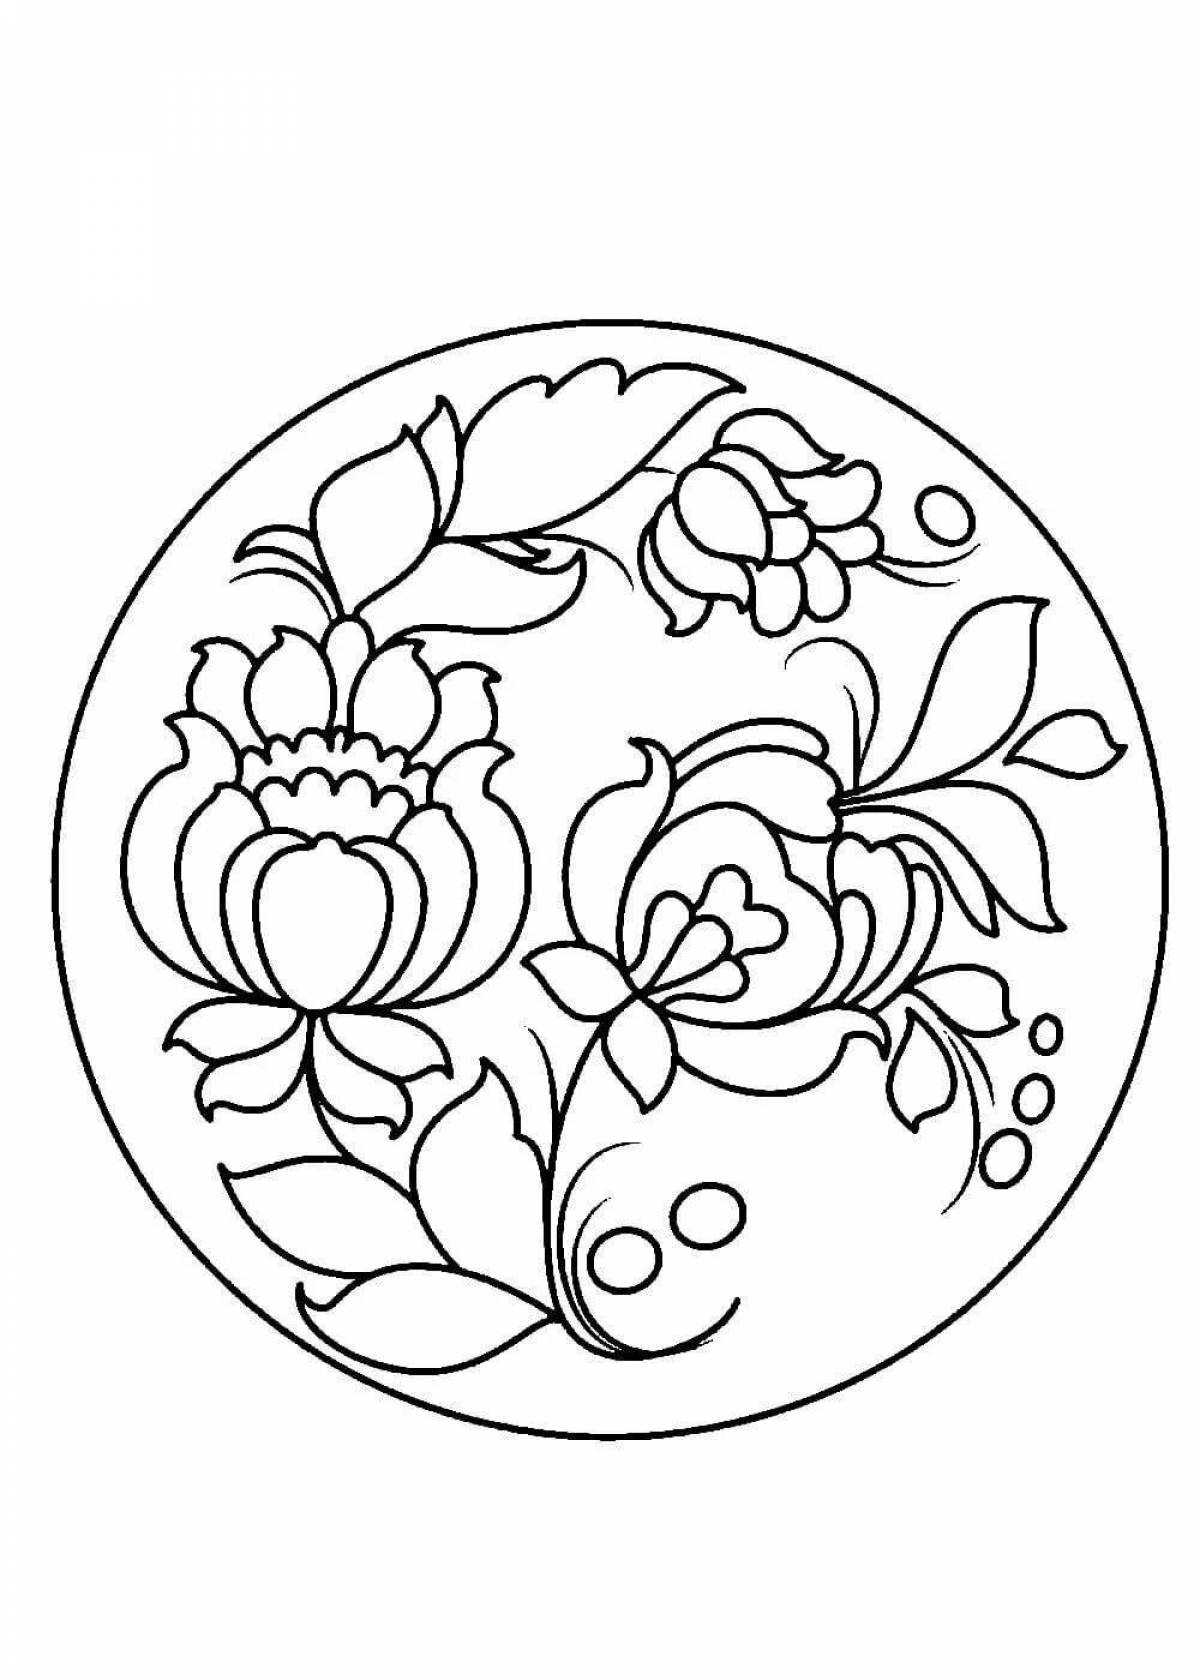 Fancy plate coloring page